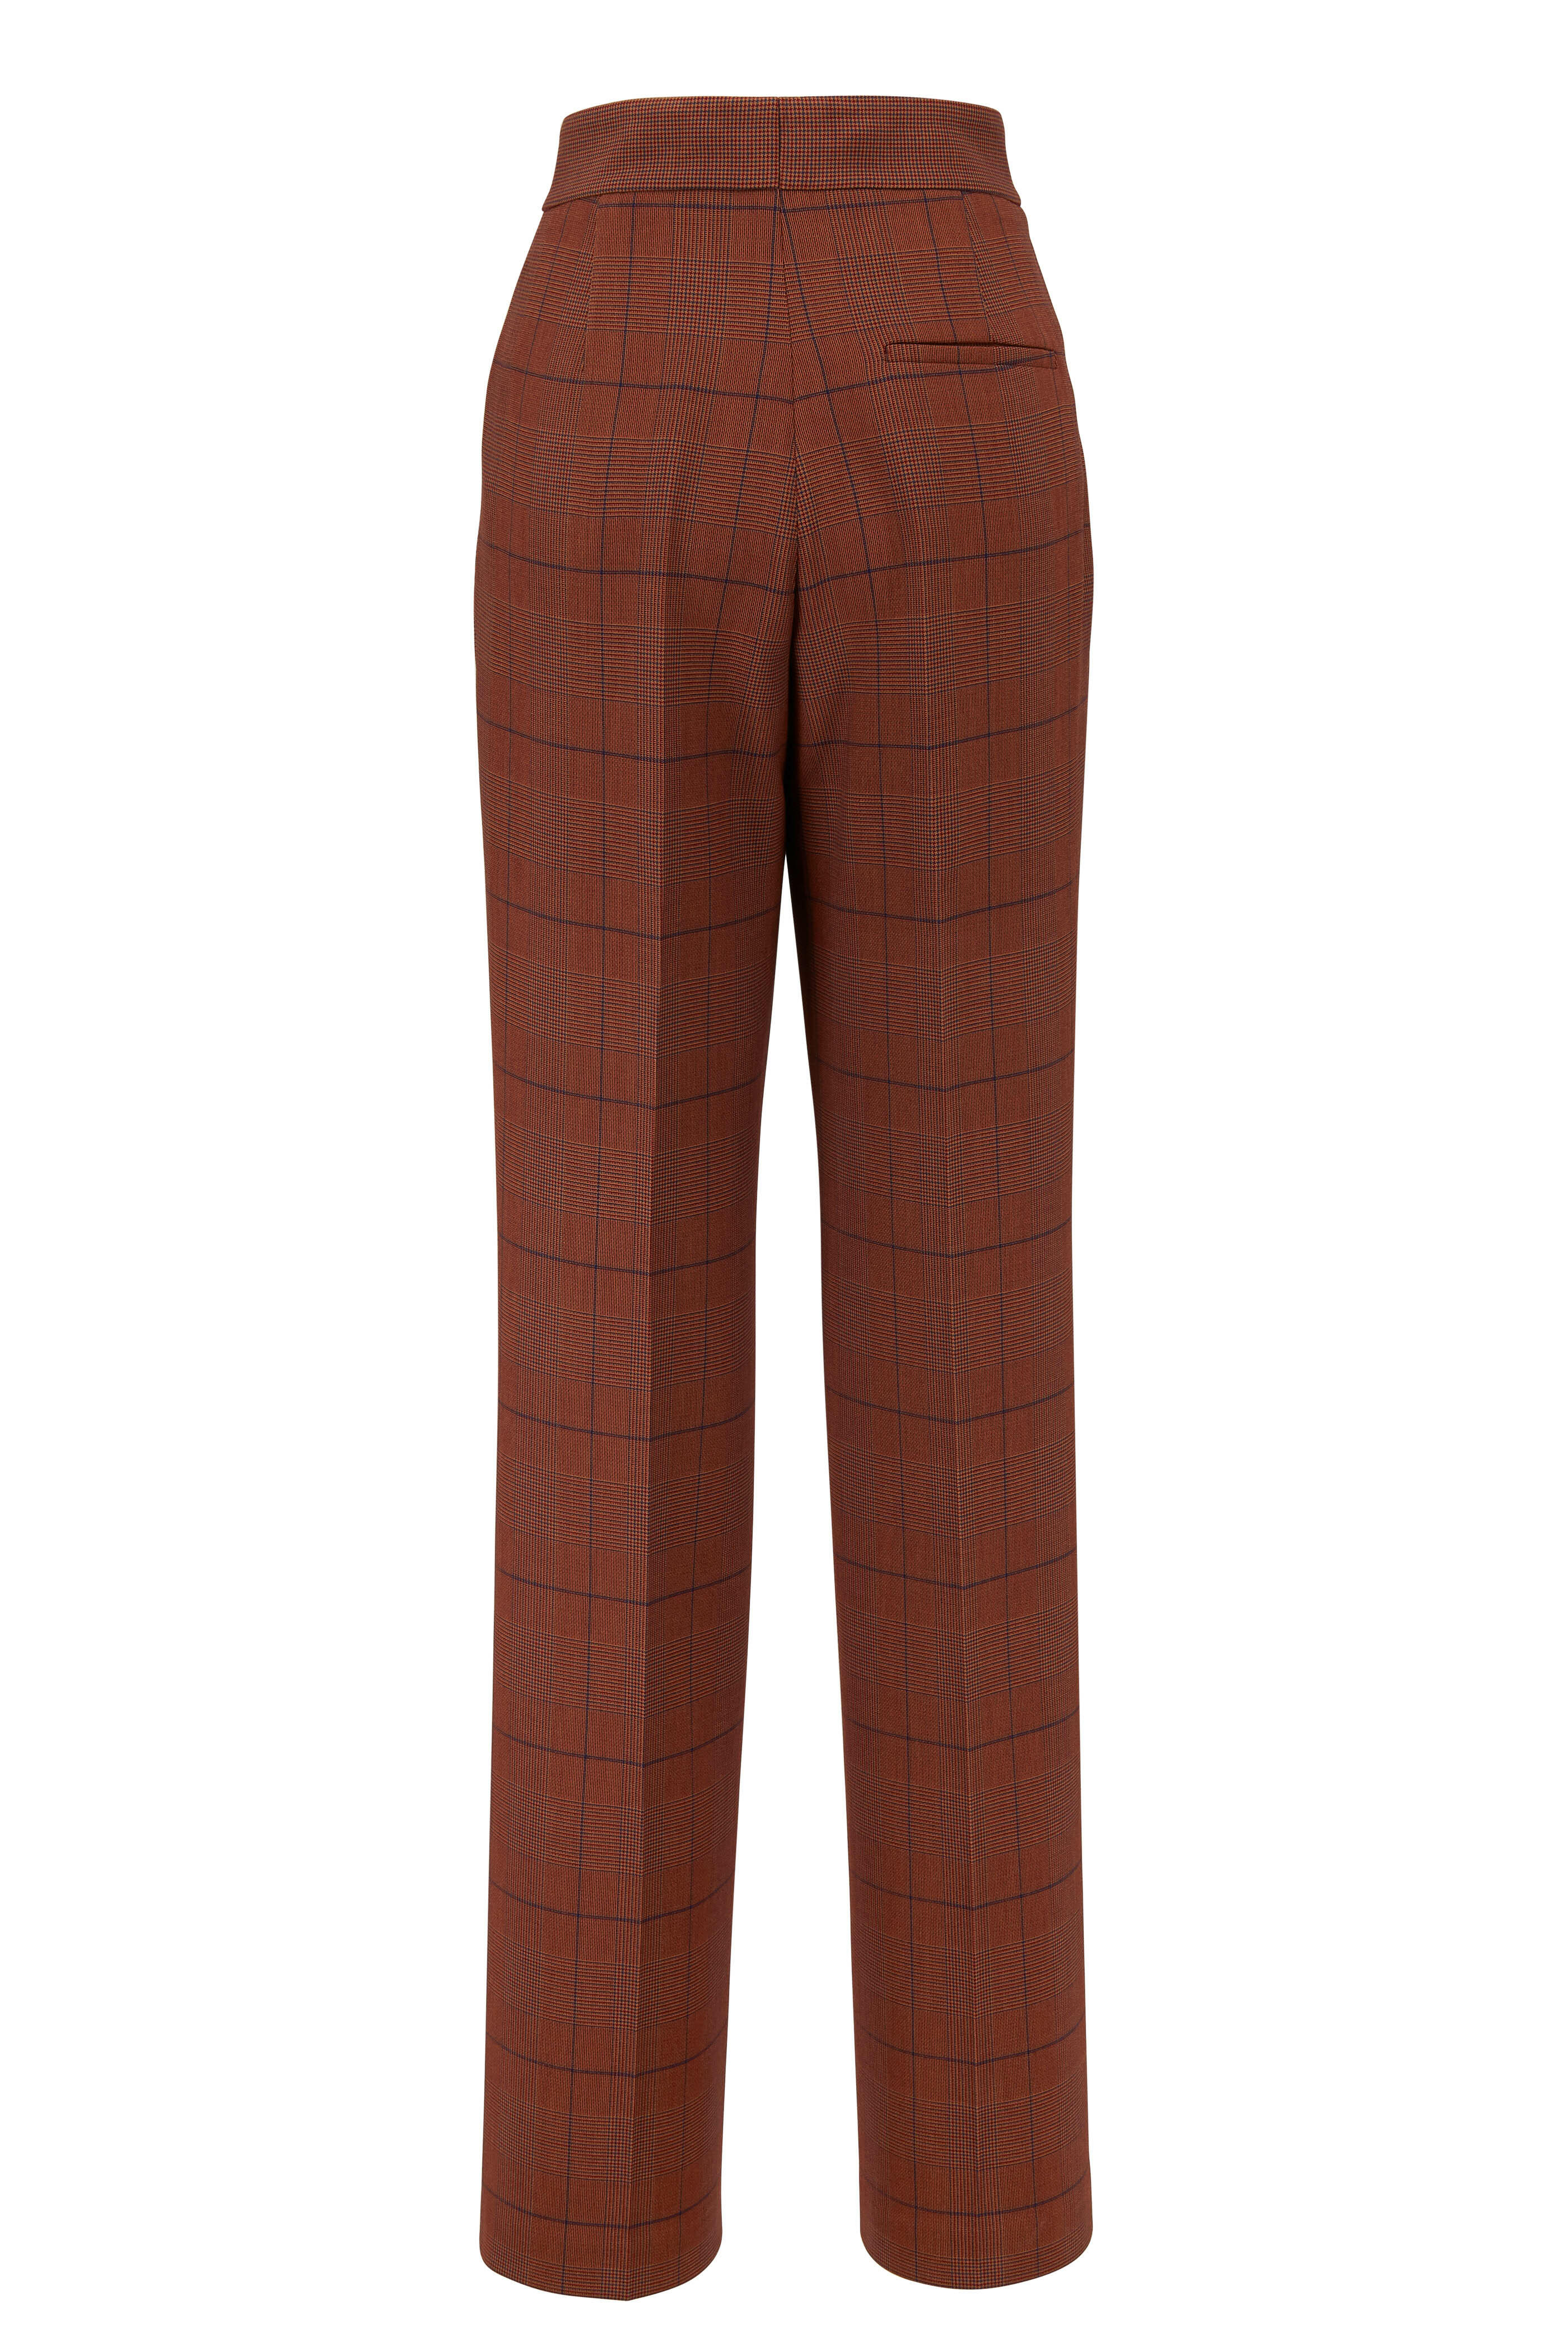 Women's Brown Plaid Pants with Belt